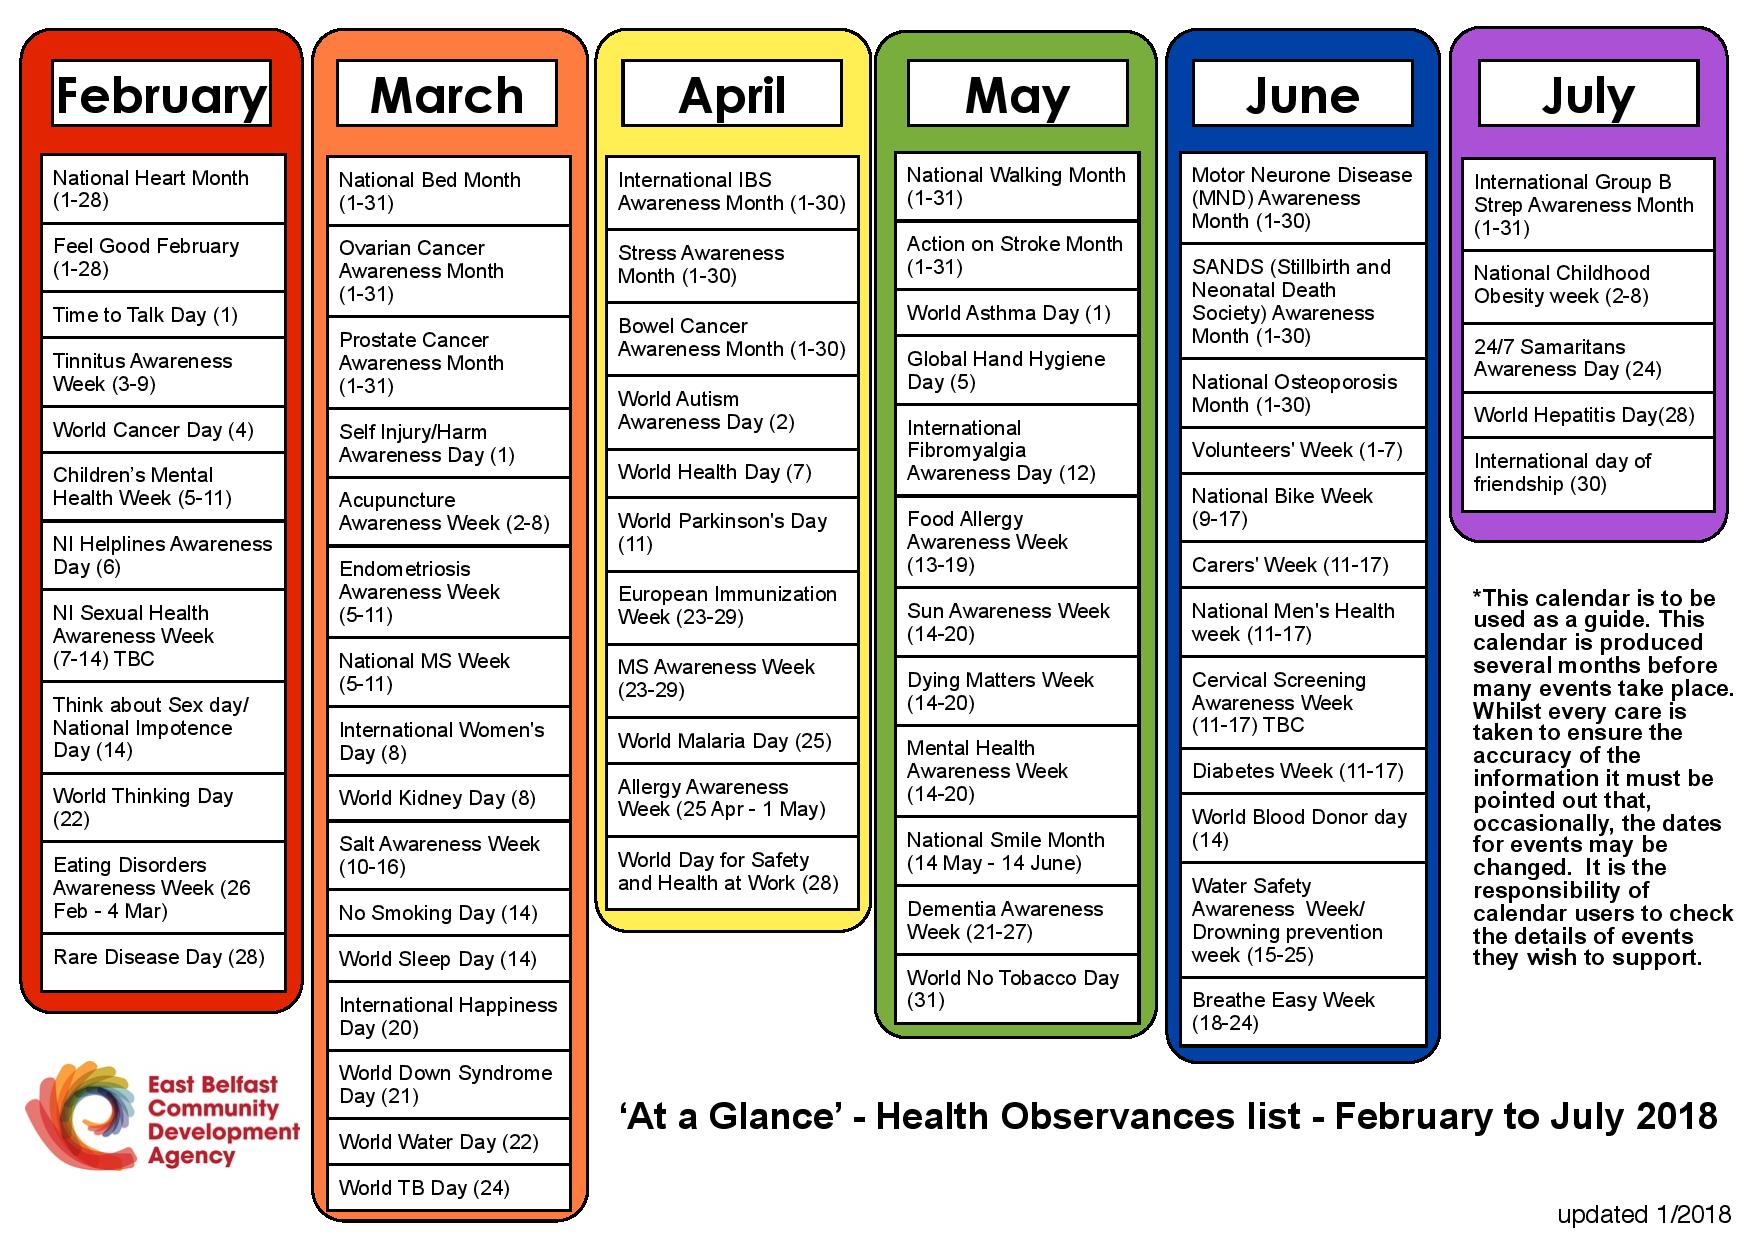 Latest list of Health Observances February to July 2018 East Belfast